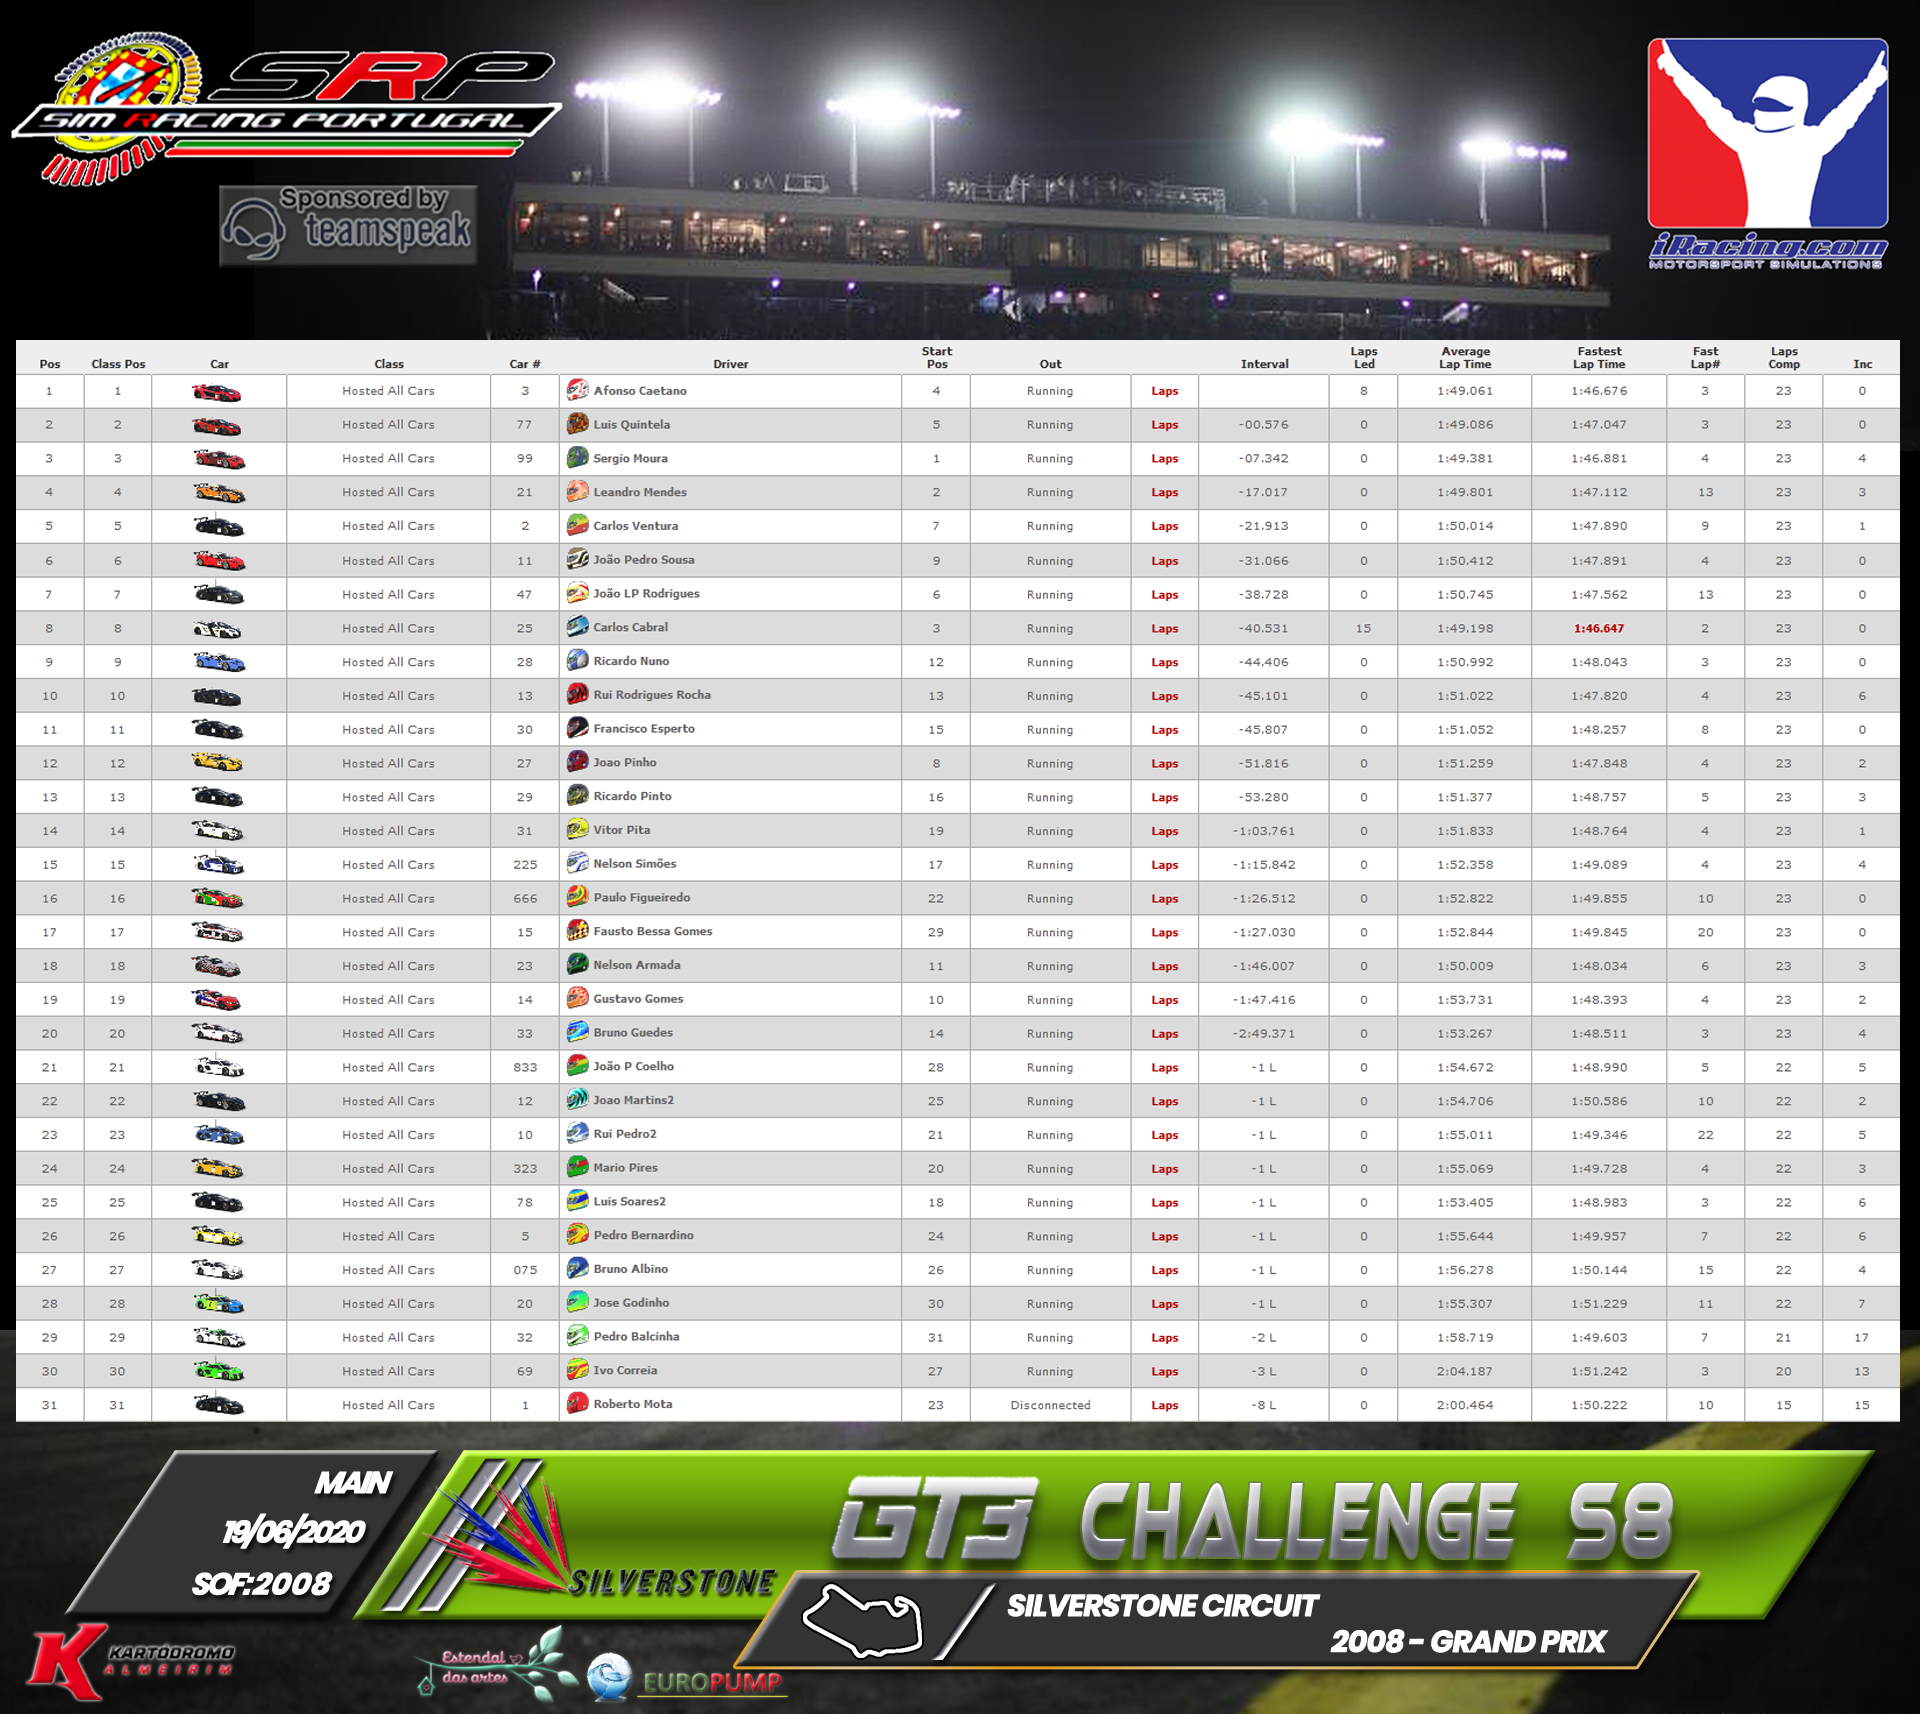 [Image: RaceResults2020M-1.png]